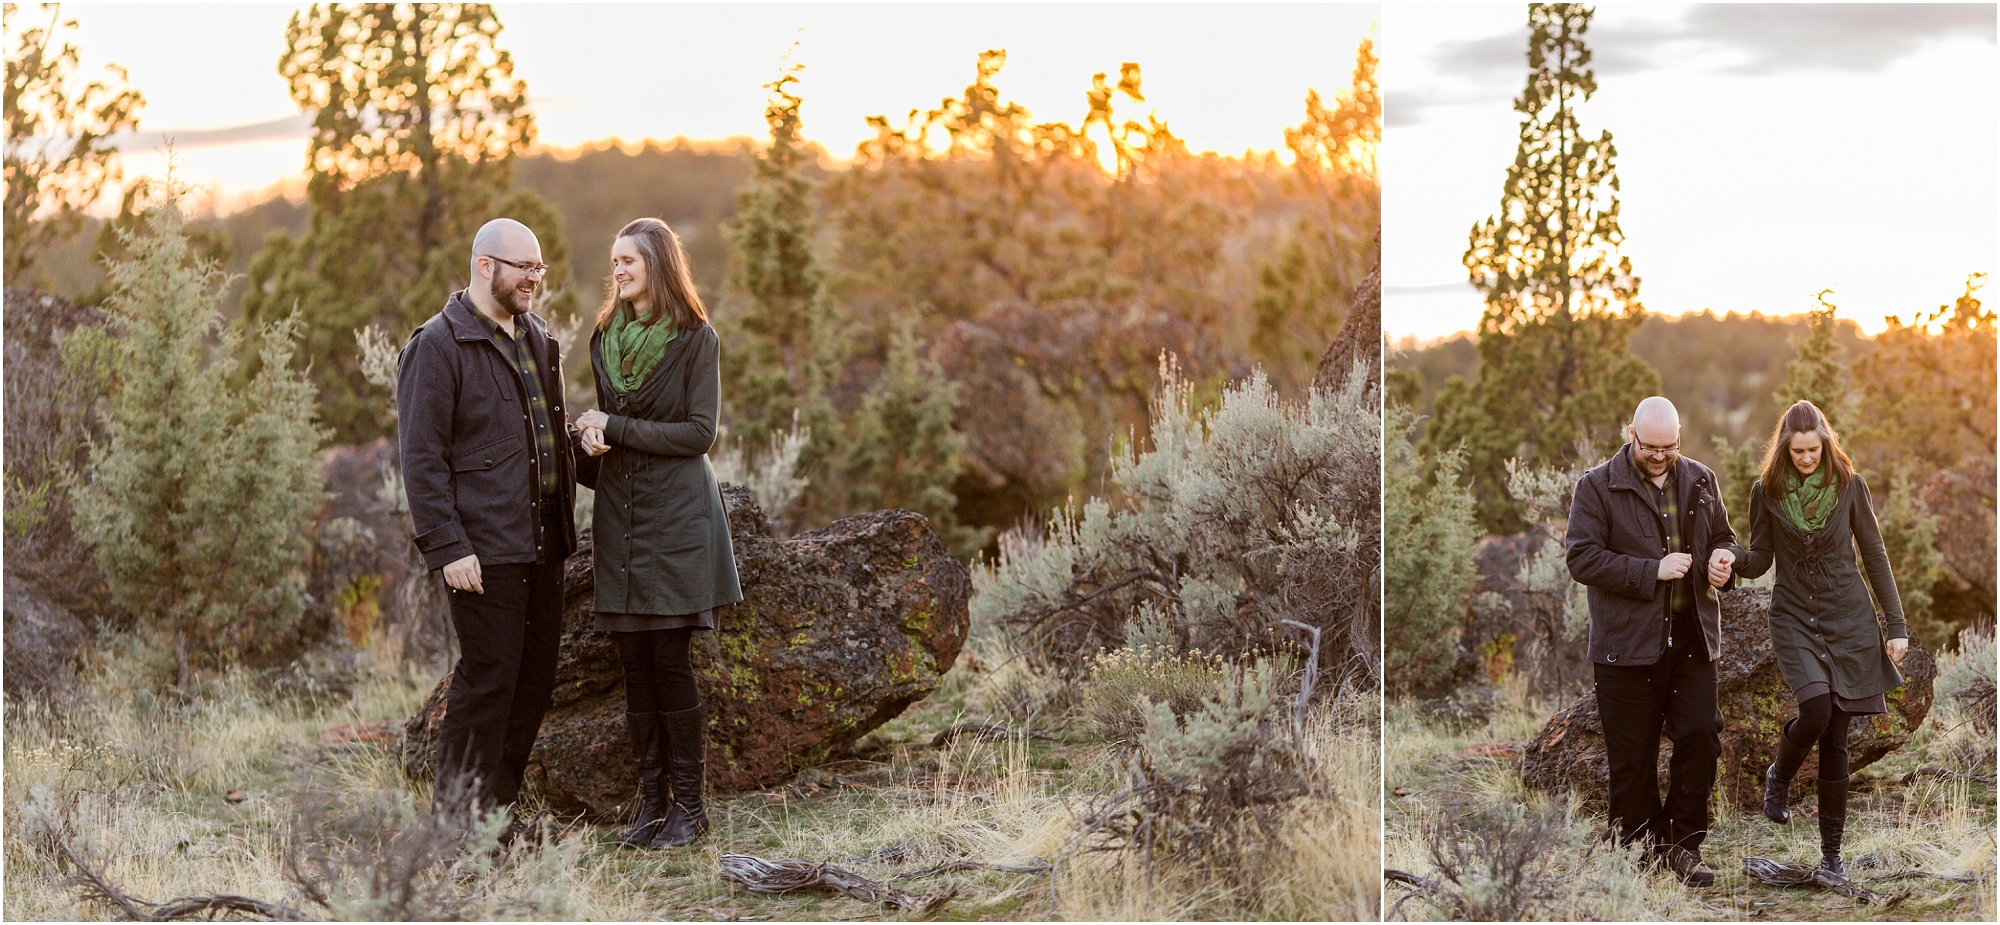 Golden hour engagement photography session in Bend Oregon. | Erica Swantek Photography